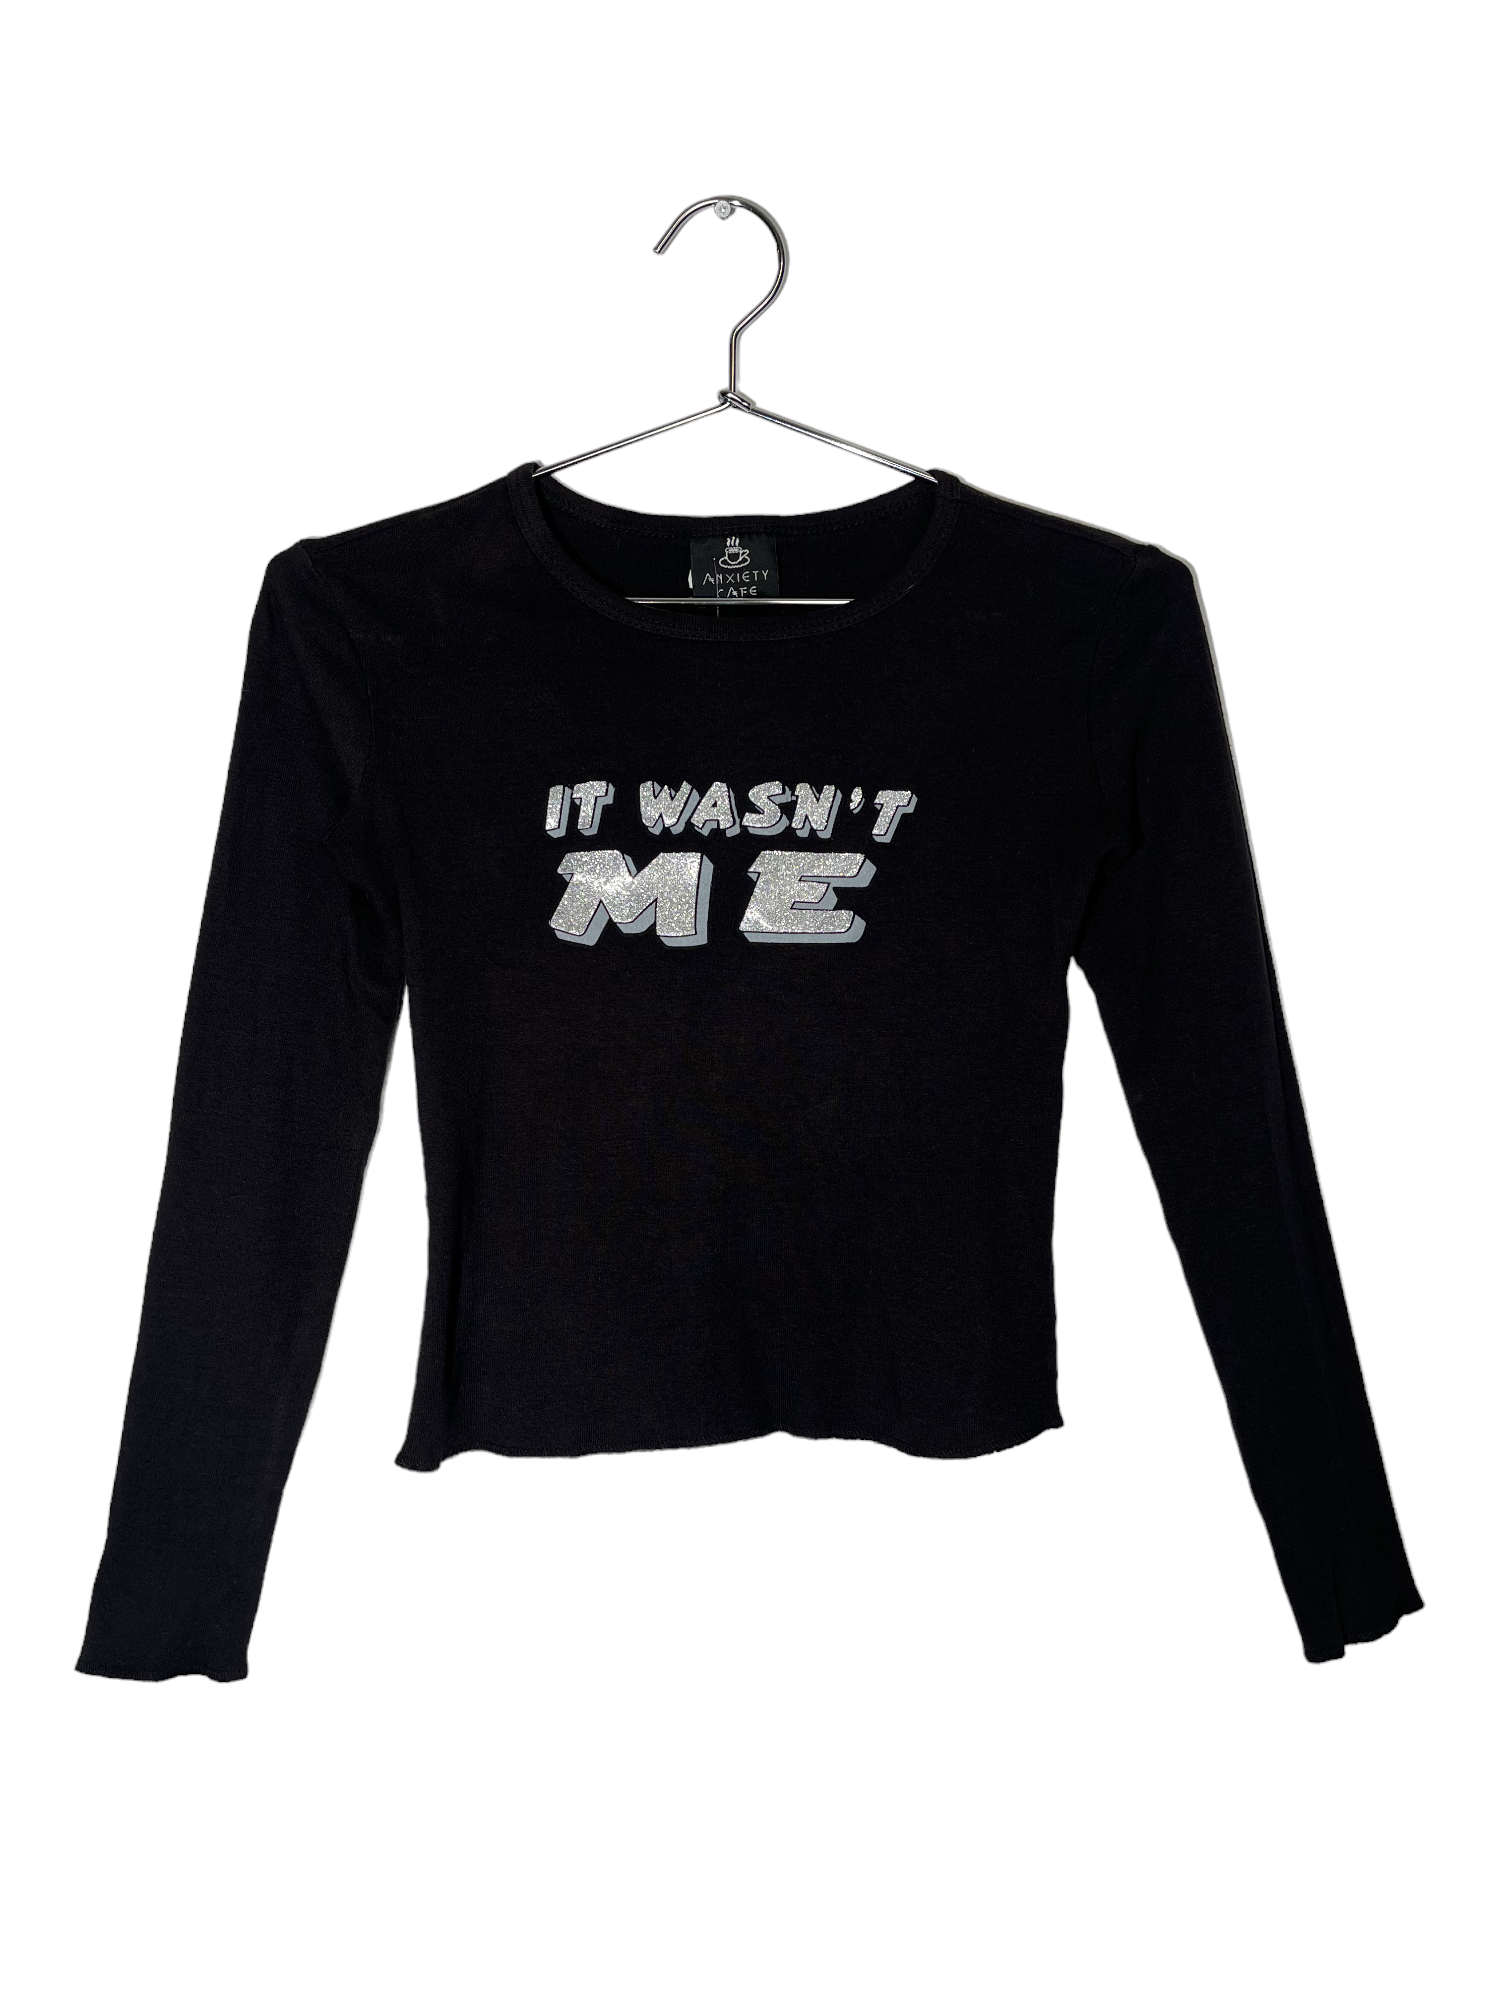 "It Wasn't Me" Graphic Long Sleeve Top